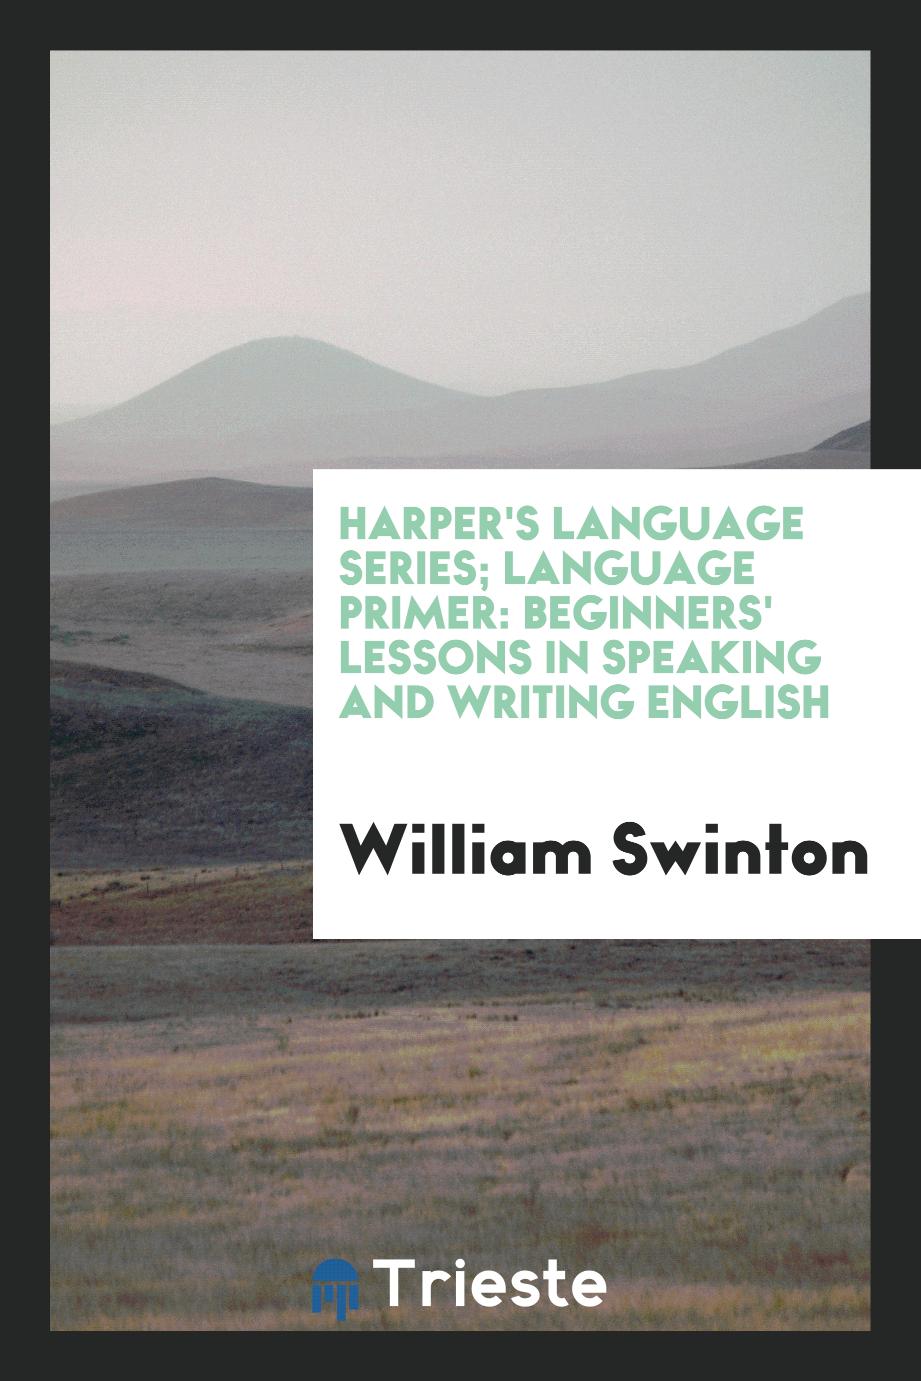 Harper's Language Series; Language Primer: Beginners' Lessons in Speaking and Writing English